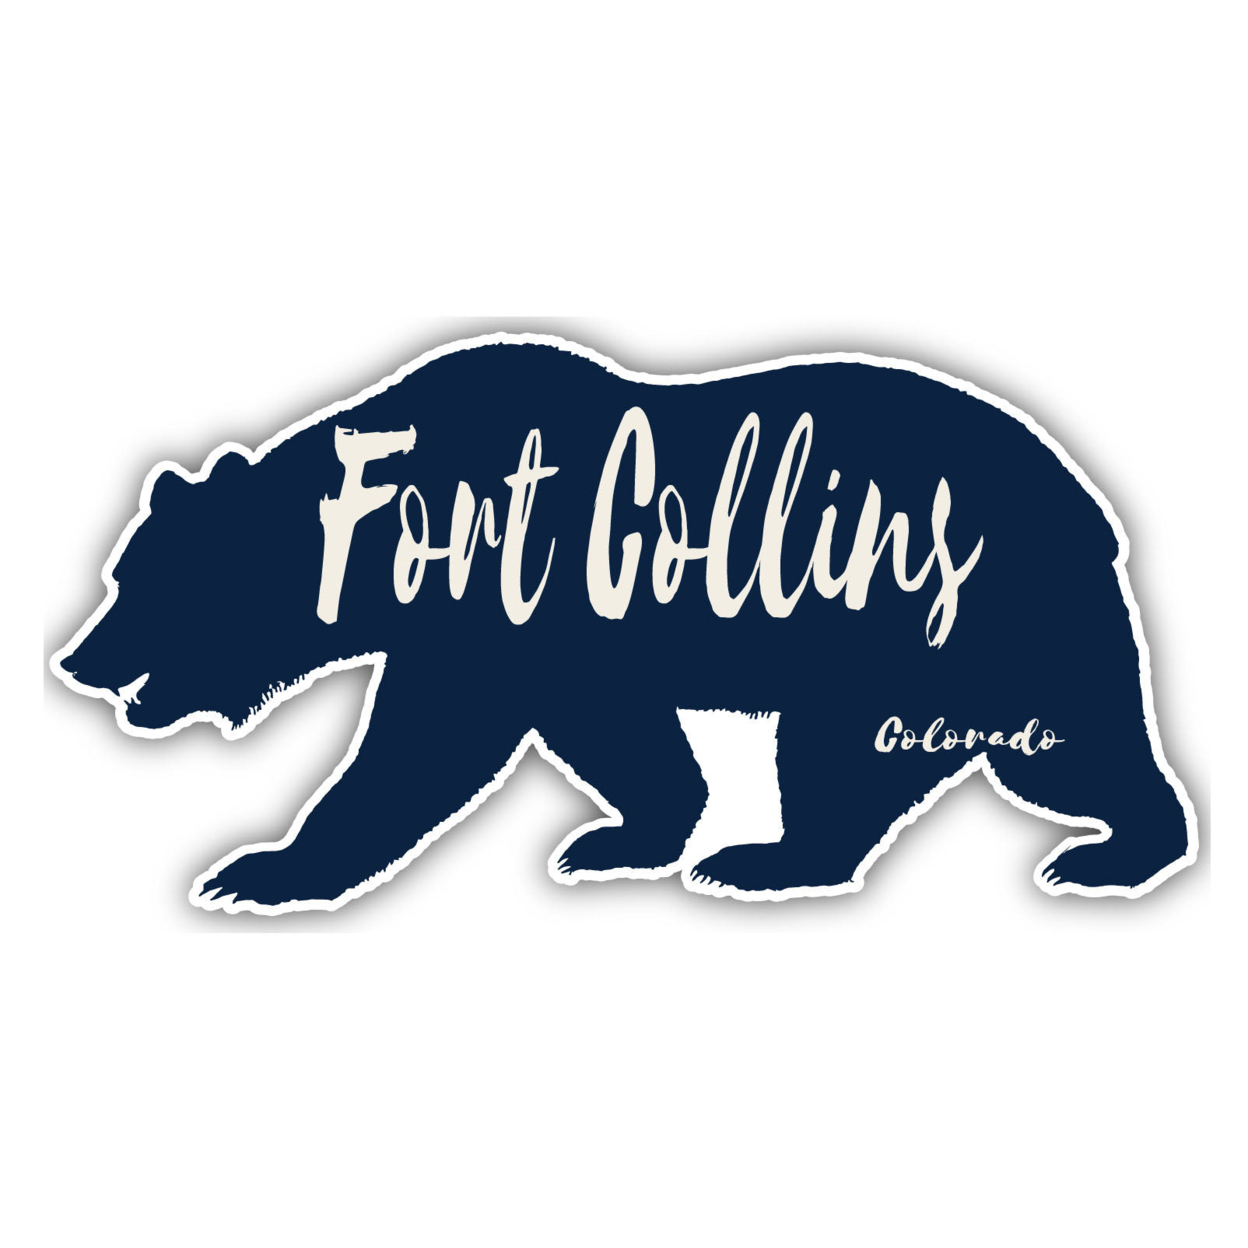 Fort Collins Colorado Souvenir Decorative Stickers (Choose Theme And Size) - 4-Pack, 12-Inch, Bear